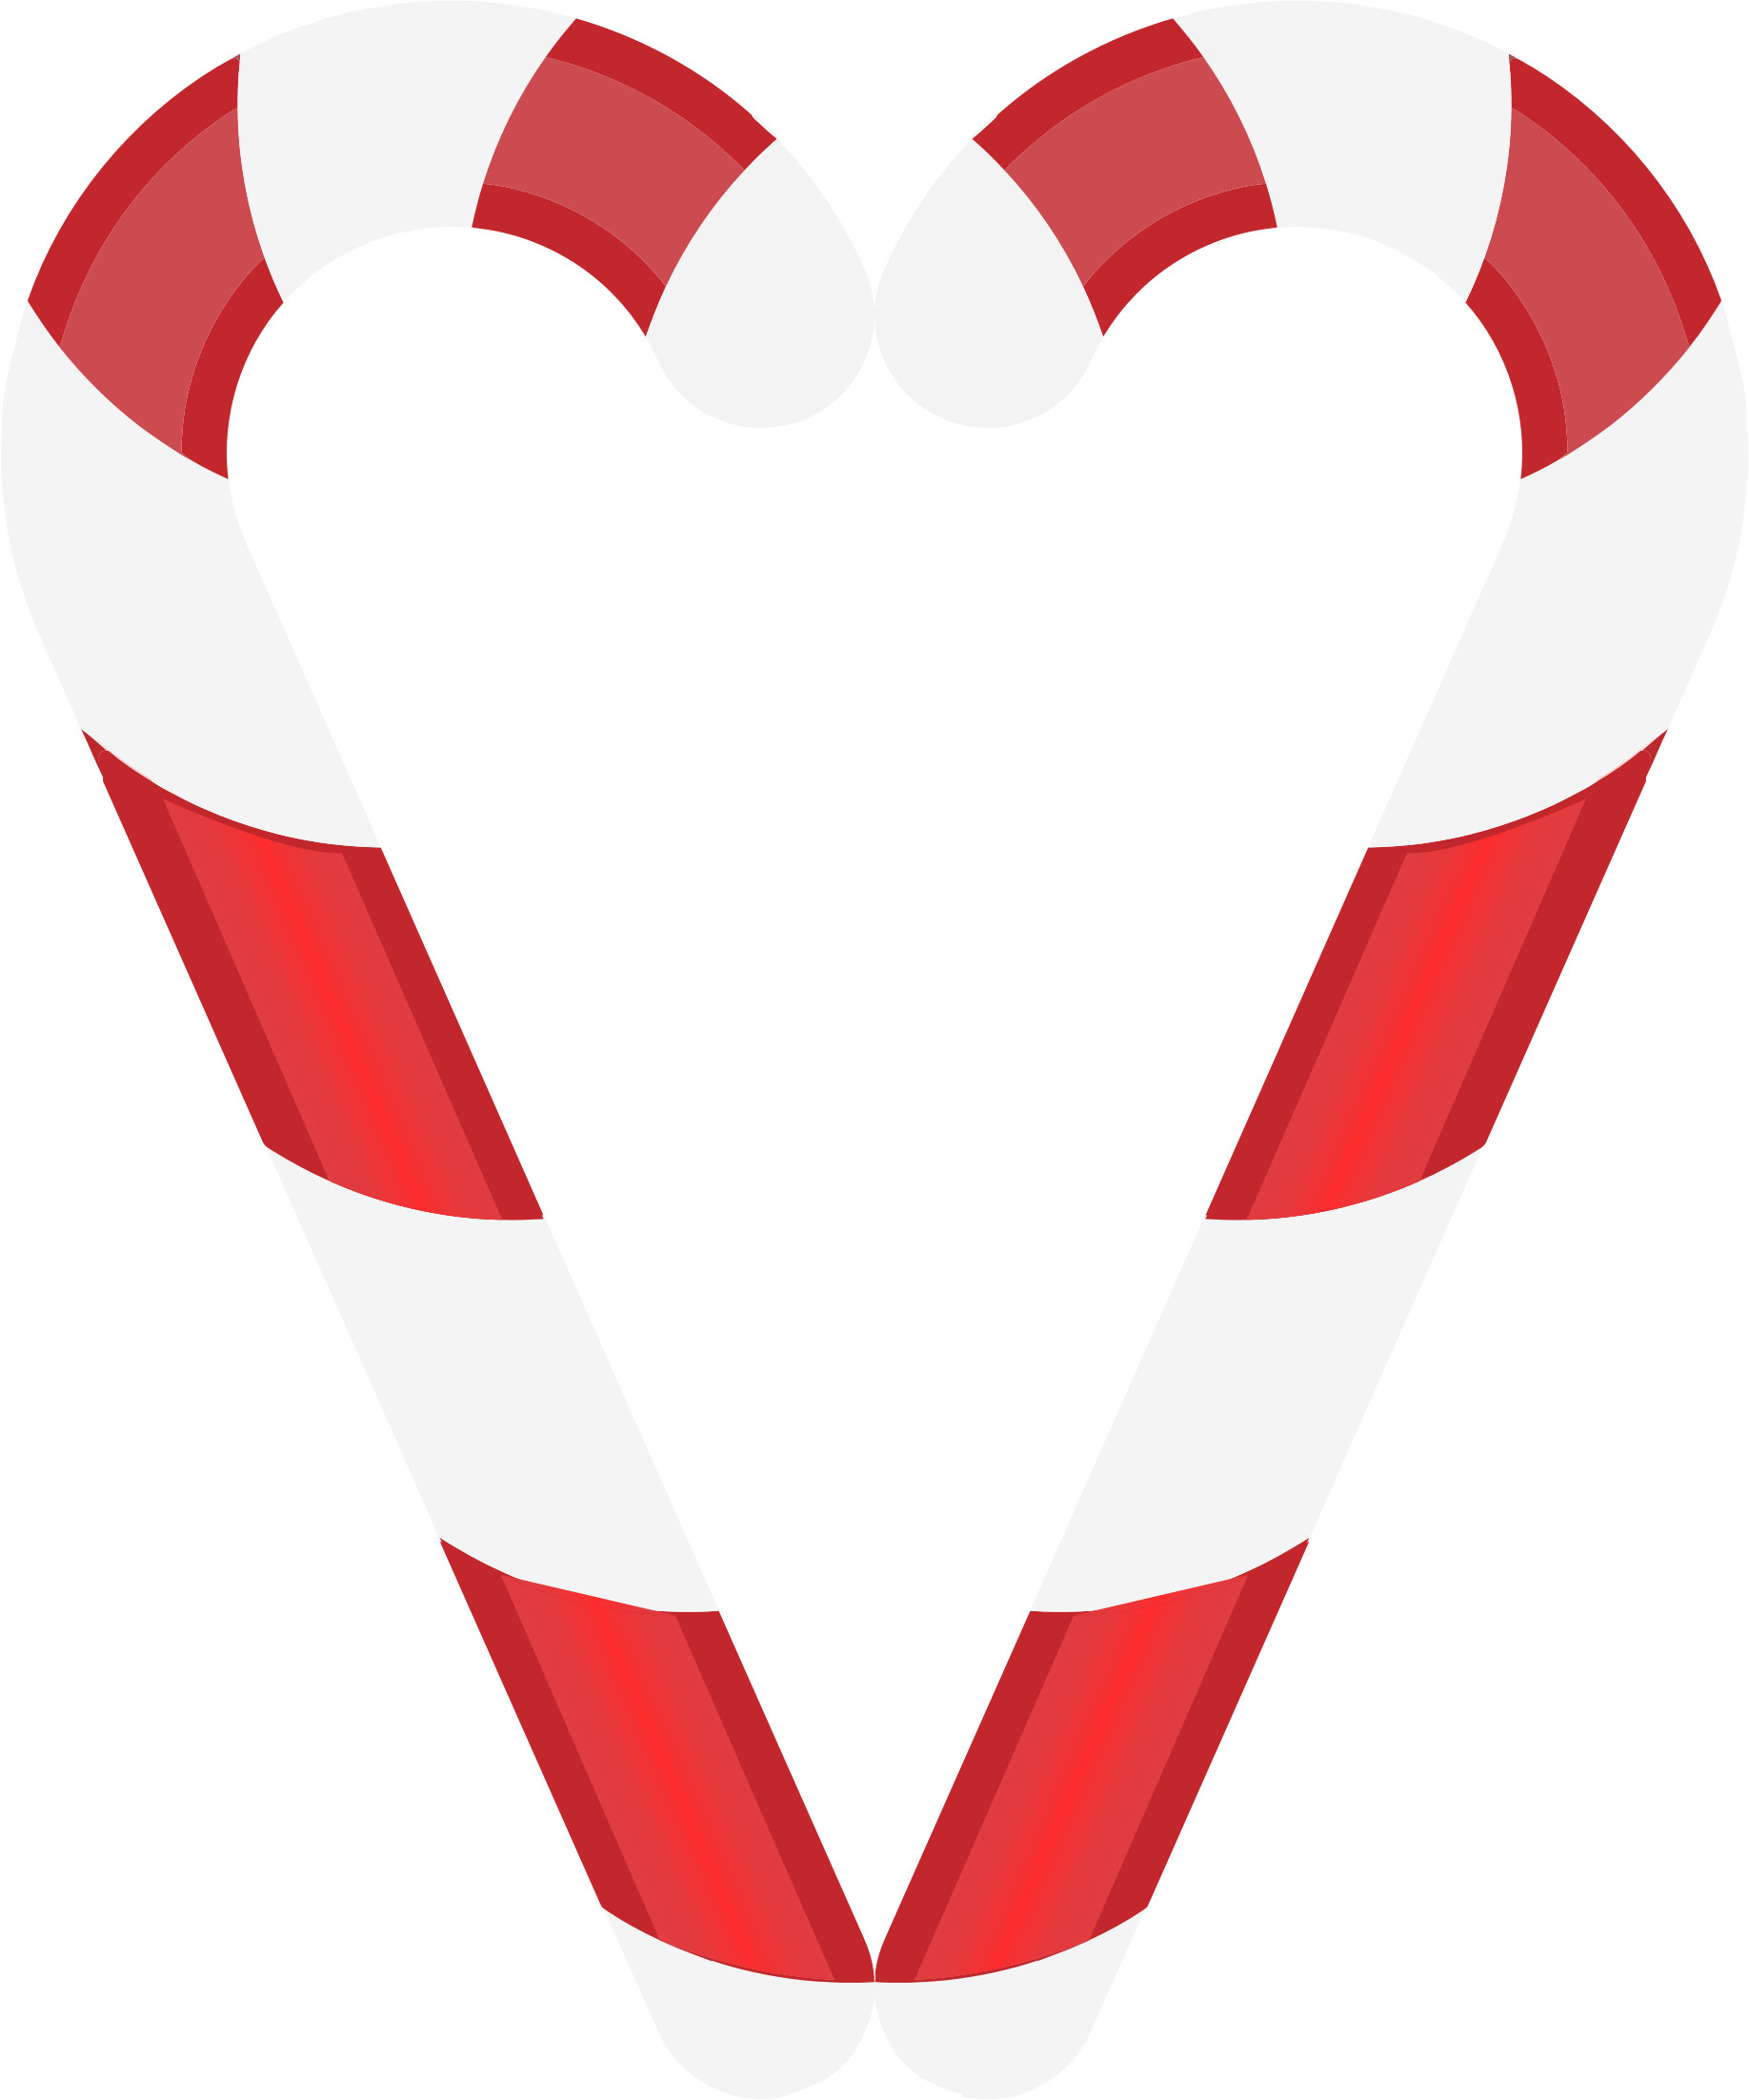 1836x2204 Candy Cane Heart No Background